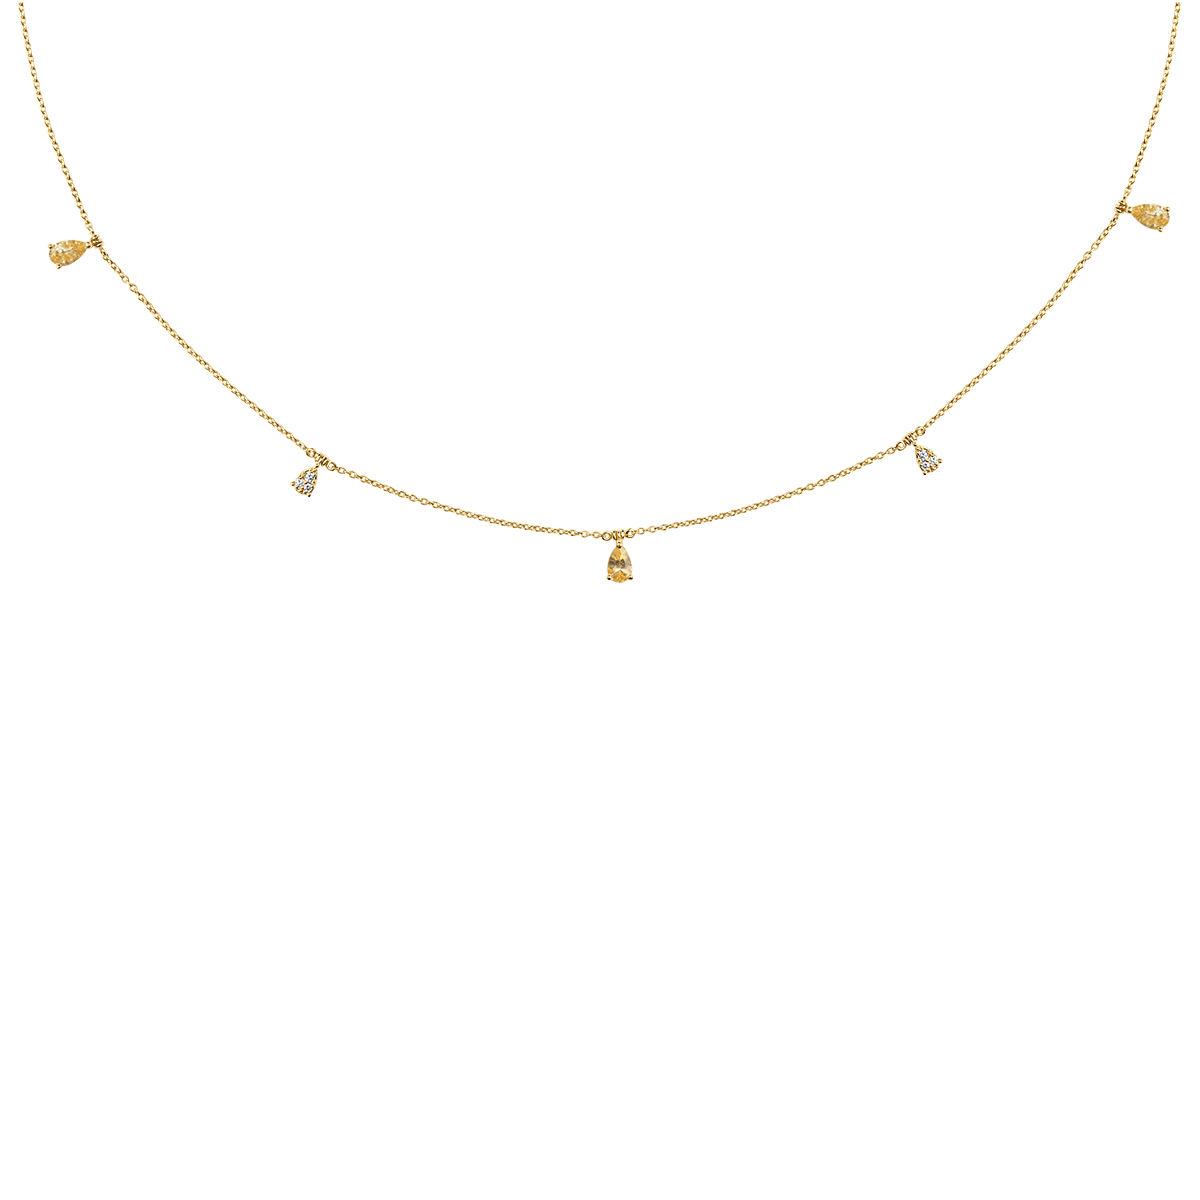 Yellow Sapphire & Illusion Drop Diamond Necklace In 18 K Yellow Gold From Chokers Collection